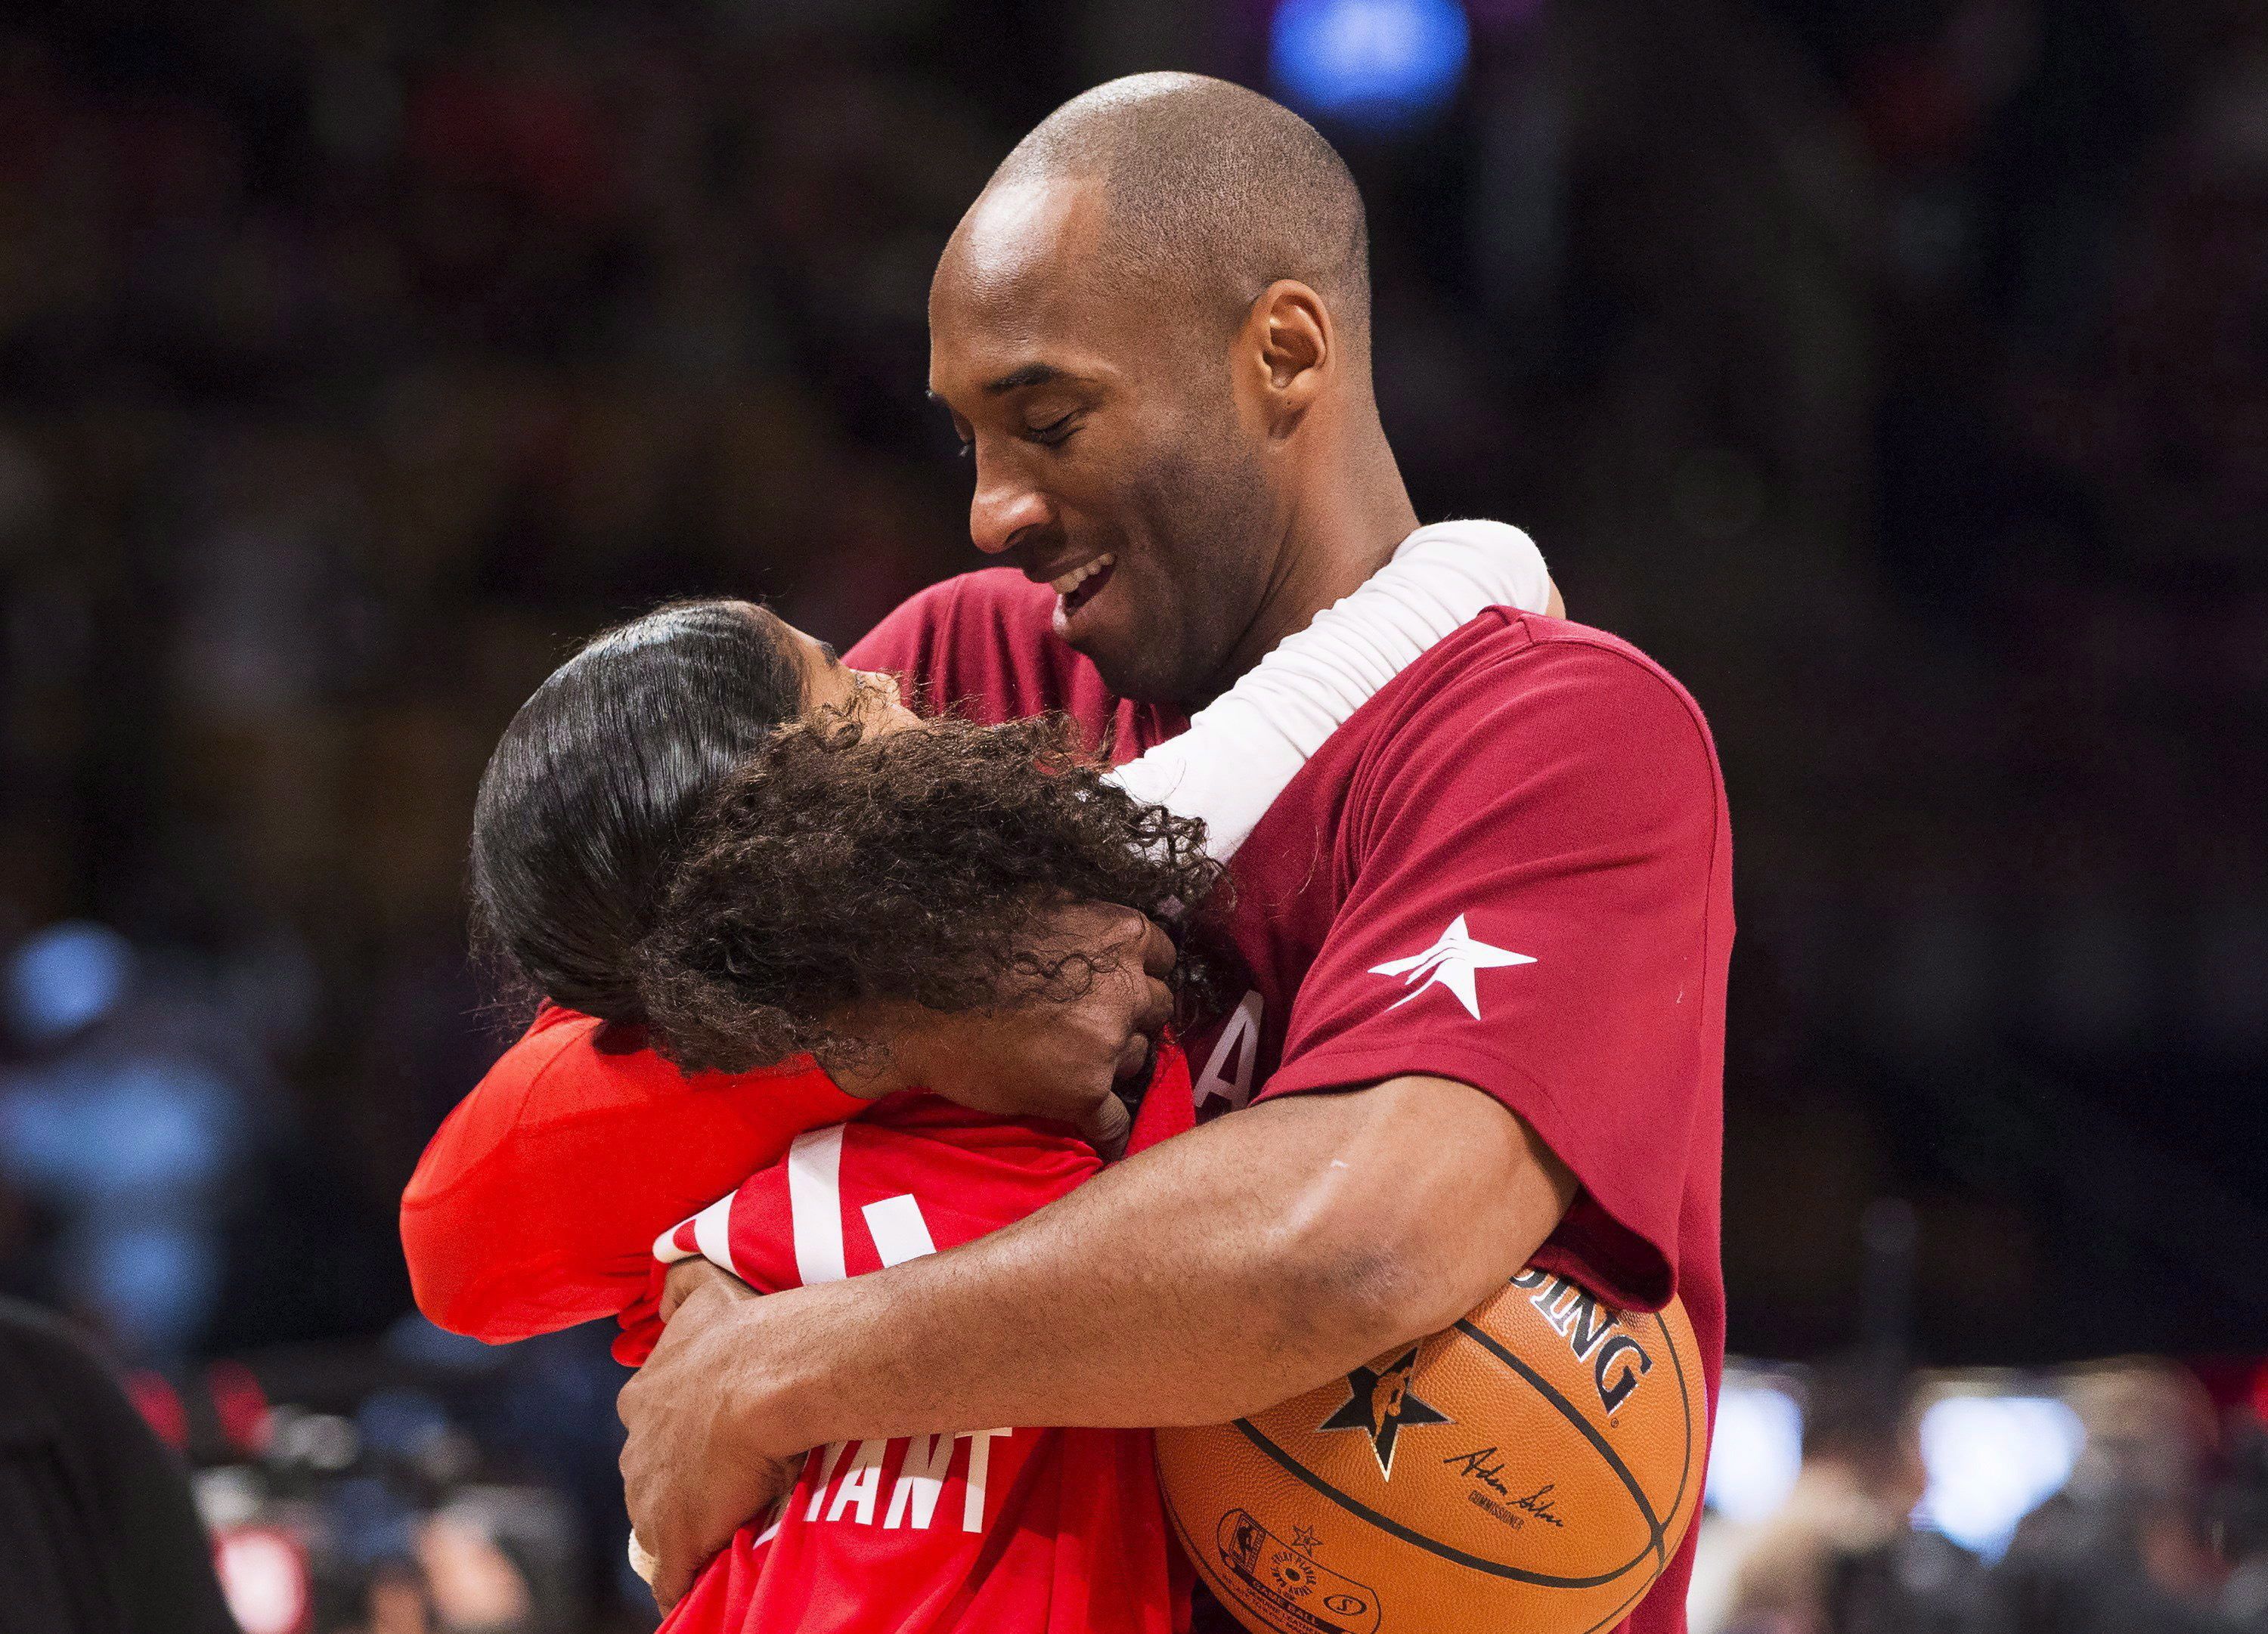 Watch: Kobe Bryant brags about daughter Gianna and her love of basketball  in 2018 TV appearance - The Boston Globe